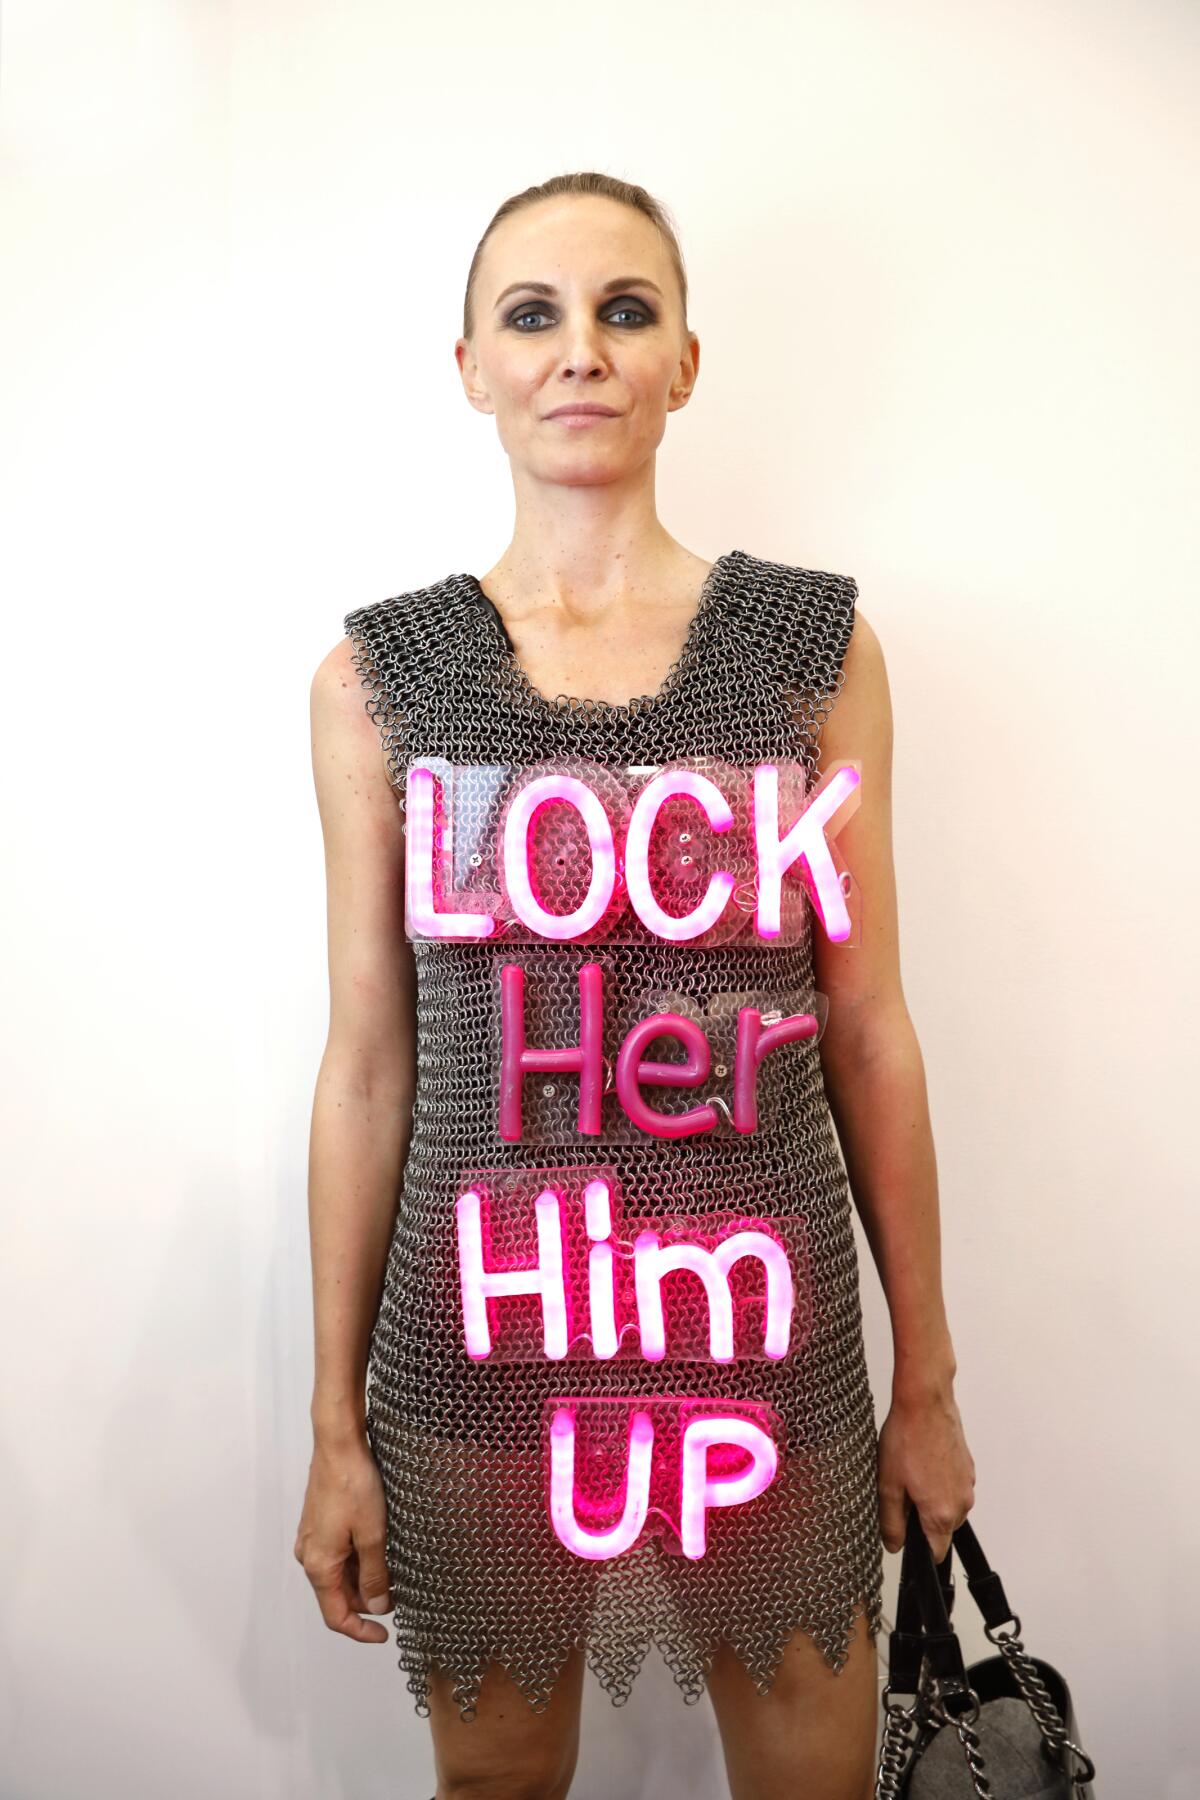 Gordana Simunovic wears an installation art dress at Frieze Los Angeles: chain-mail style with the words "Lock Her Him Up" in neon pink and "Lock Him Up" lit up.